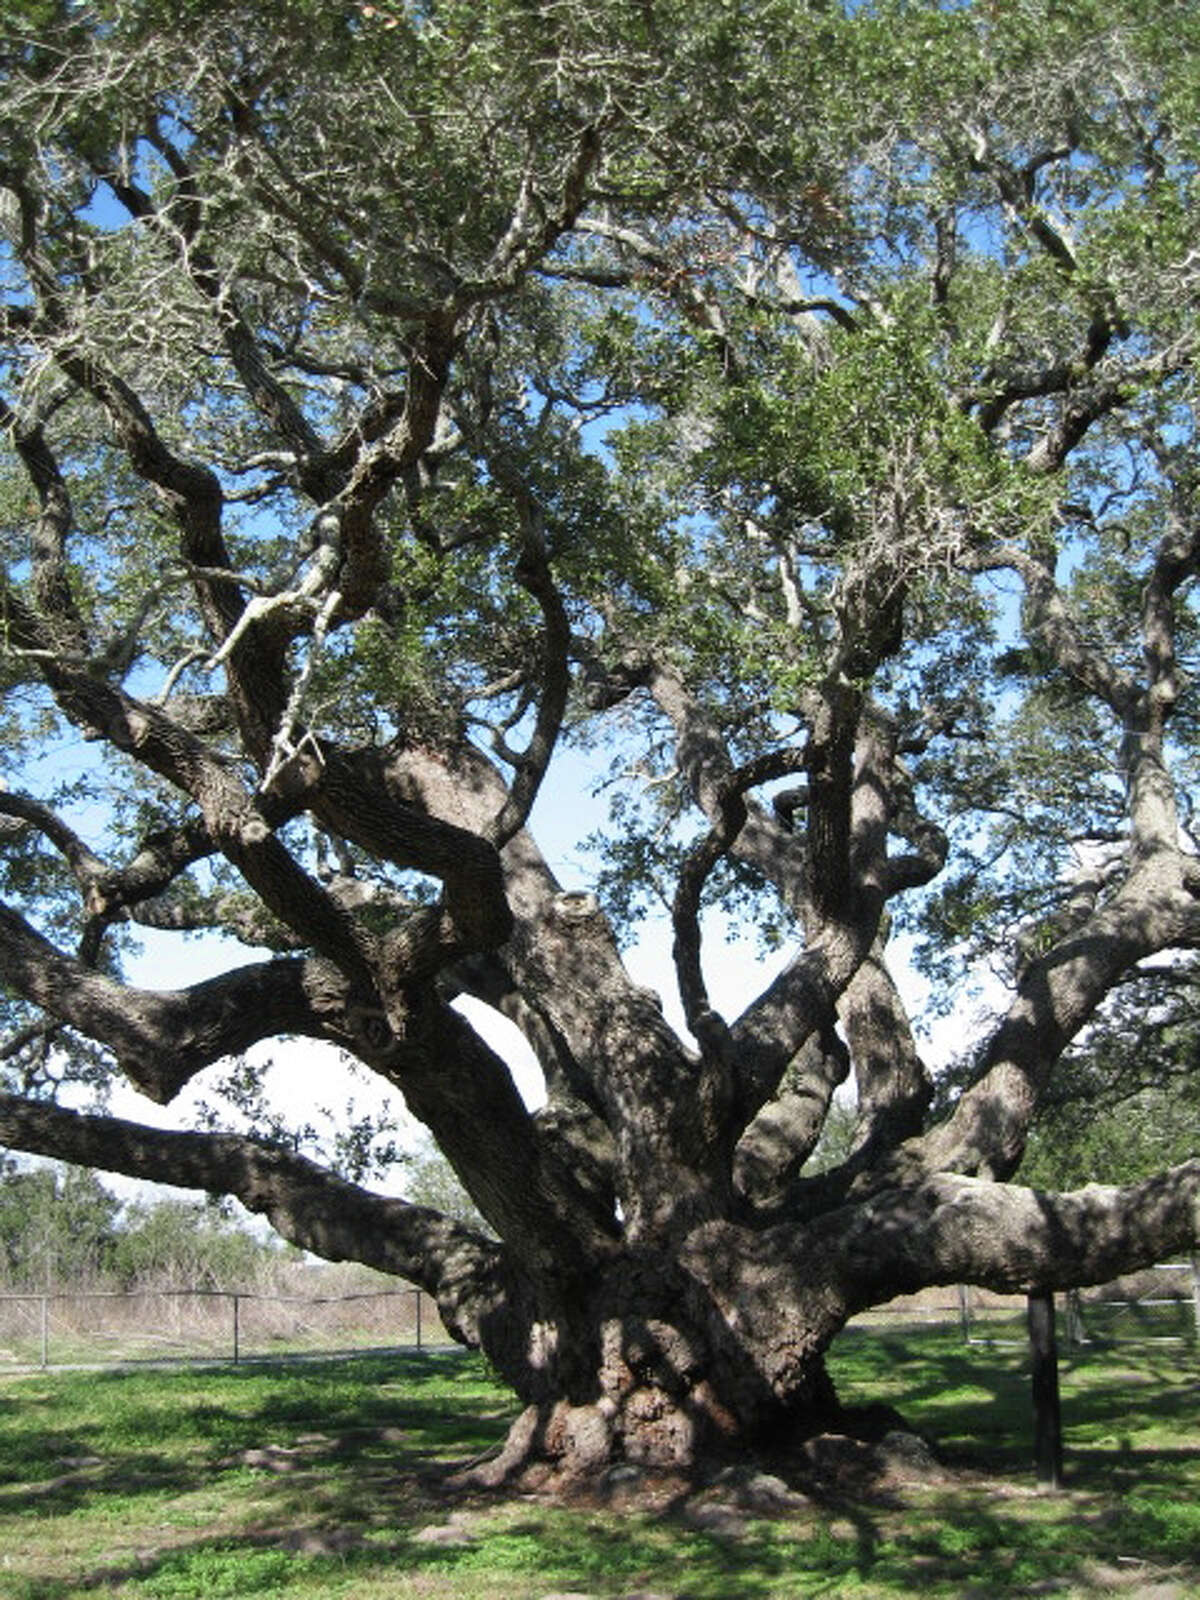 STATE PARK: A major draw to Goose Island State Park is the Big Tree, a 44-foot-tall coastal live oak believed to be more than 1,000 years old